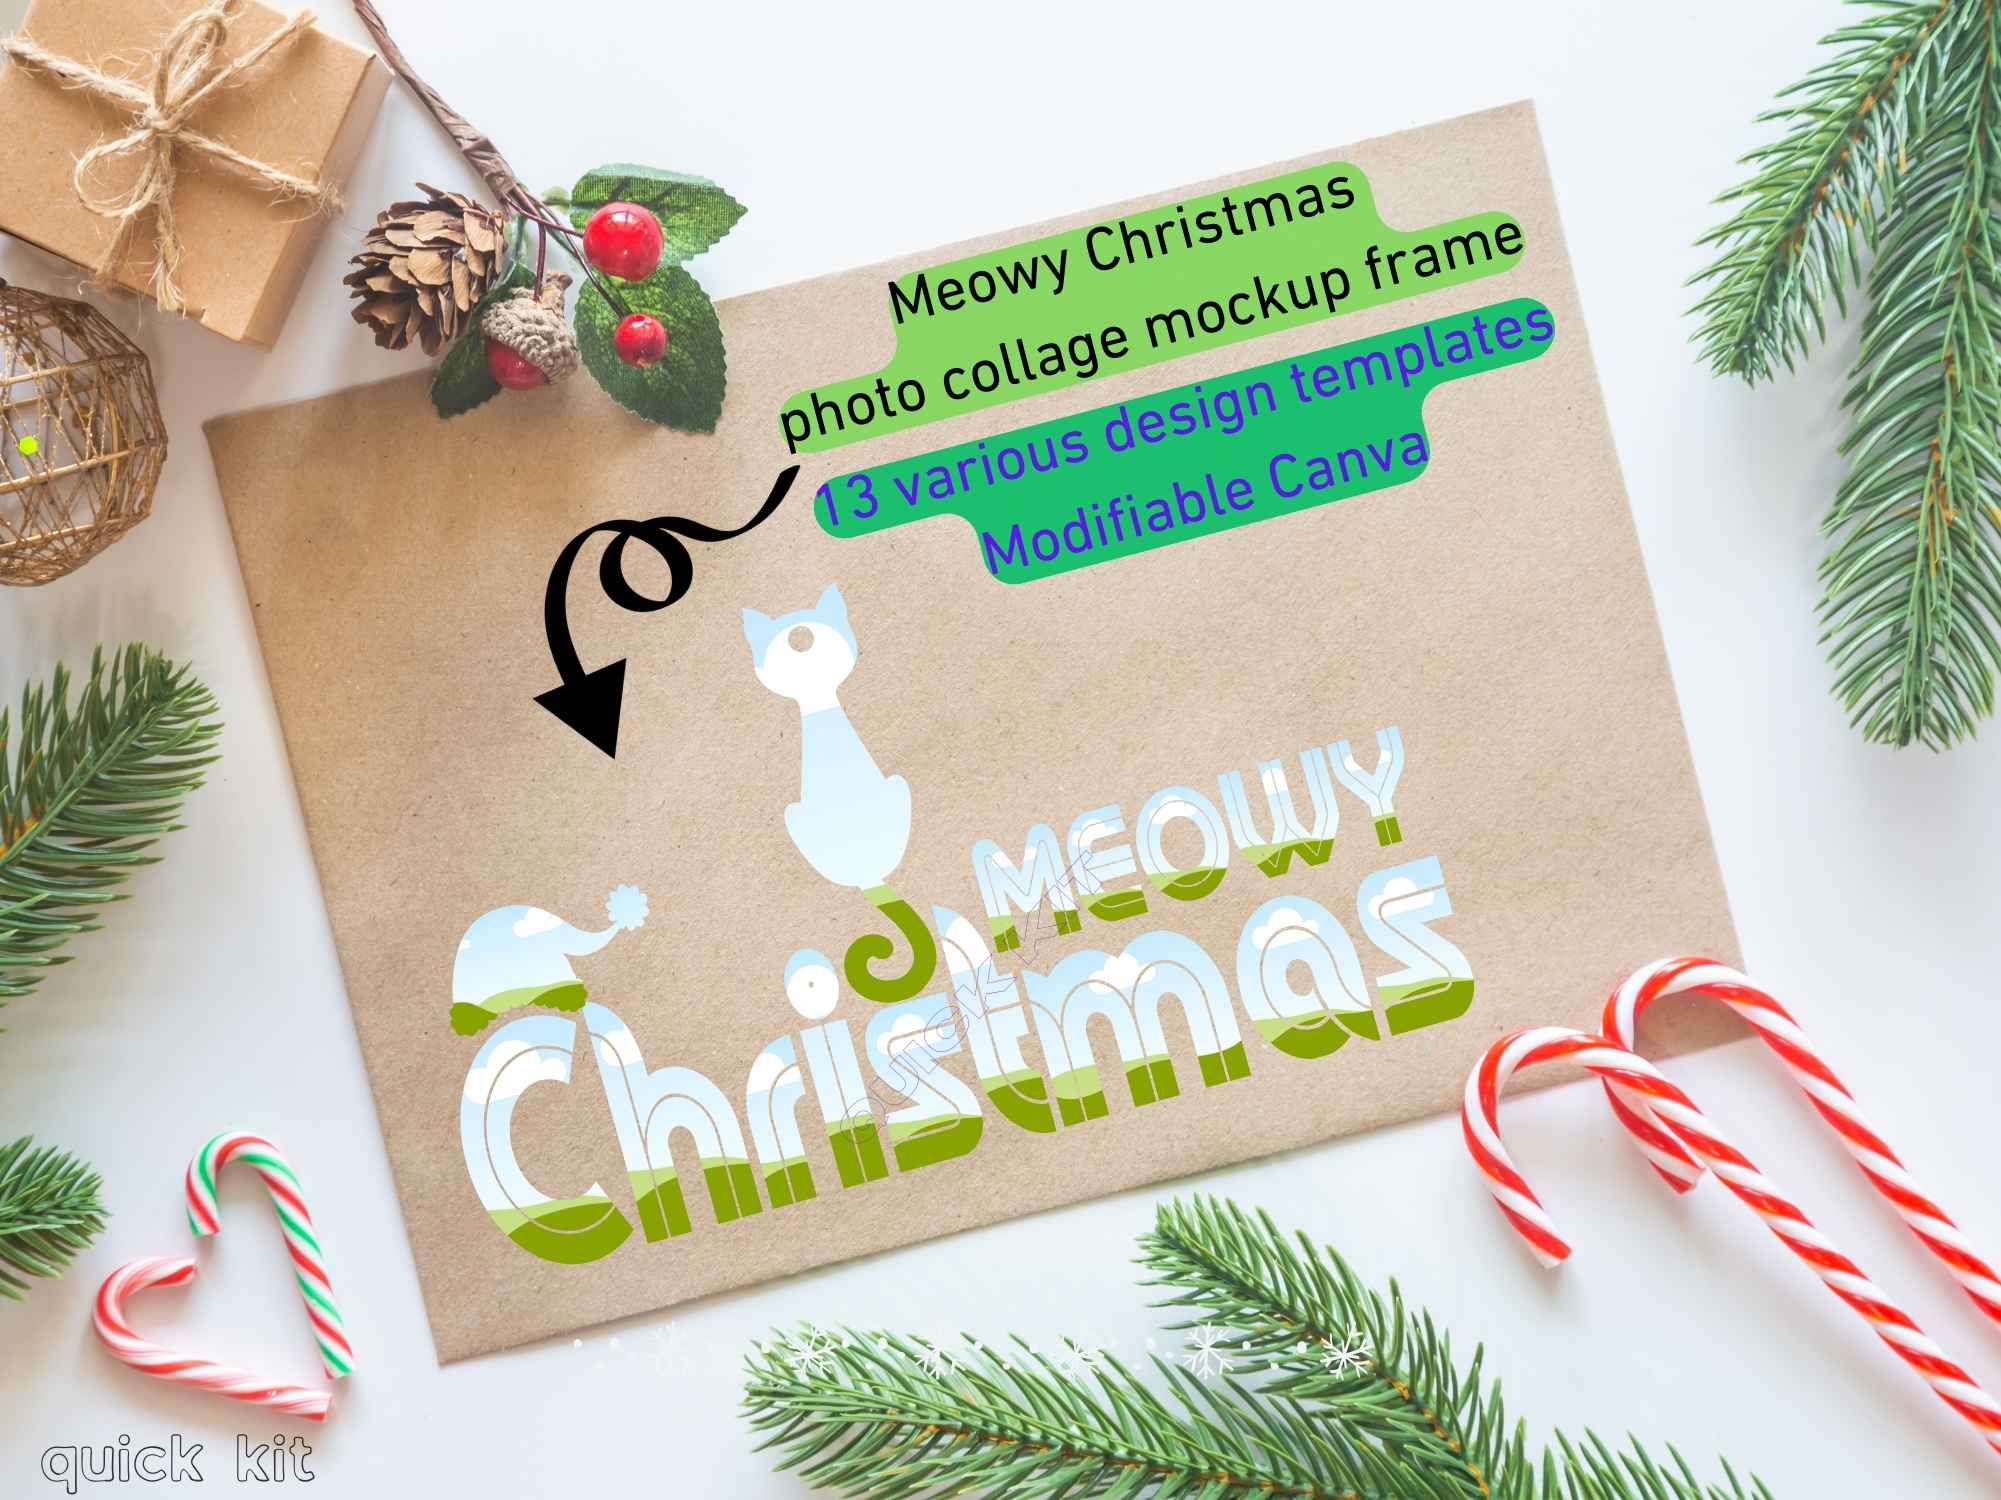 Meowy Christmas photo collage mockup frame has 13 various design templates Modifiable Canva with 2023 Merry Christmas mockup Frame Bundle